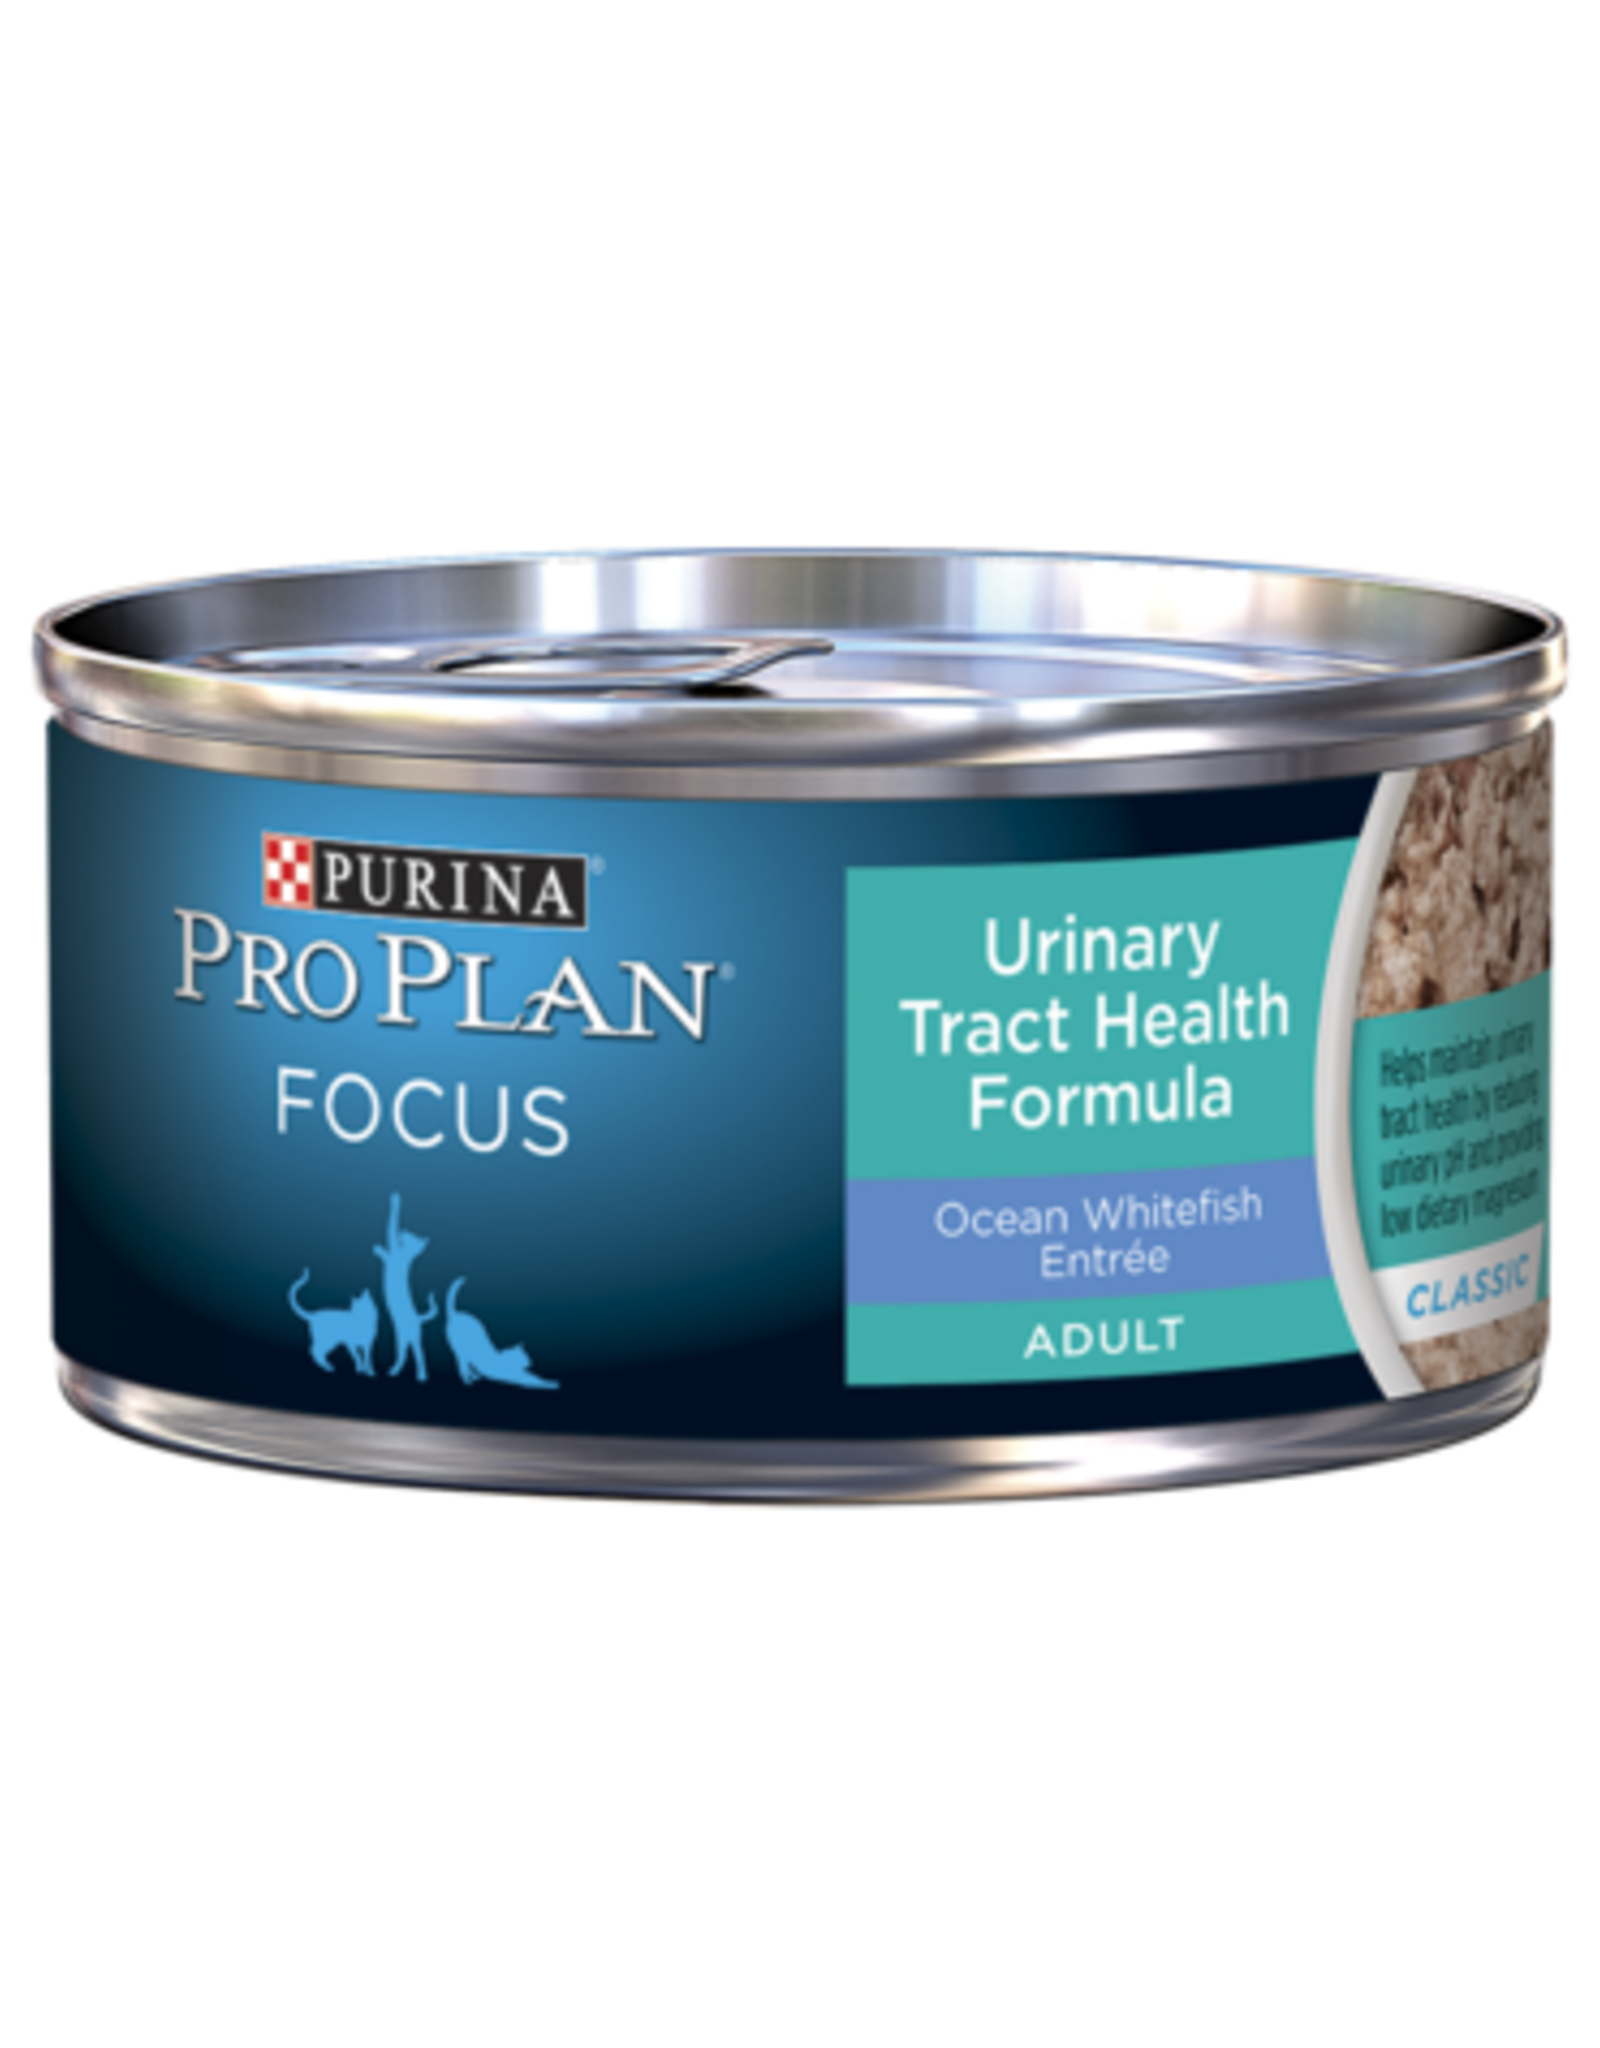 NESTLE PURINA PETCARE PRO PLAN CAT CAN URINARY TRACT OCEAN WHITEFISH 3OZ CASE OF 24